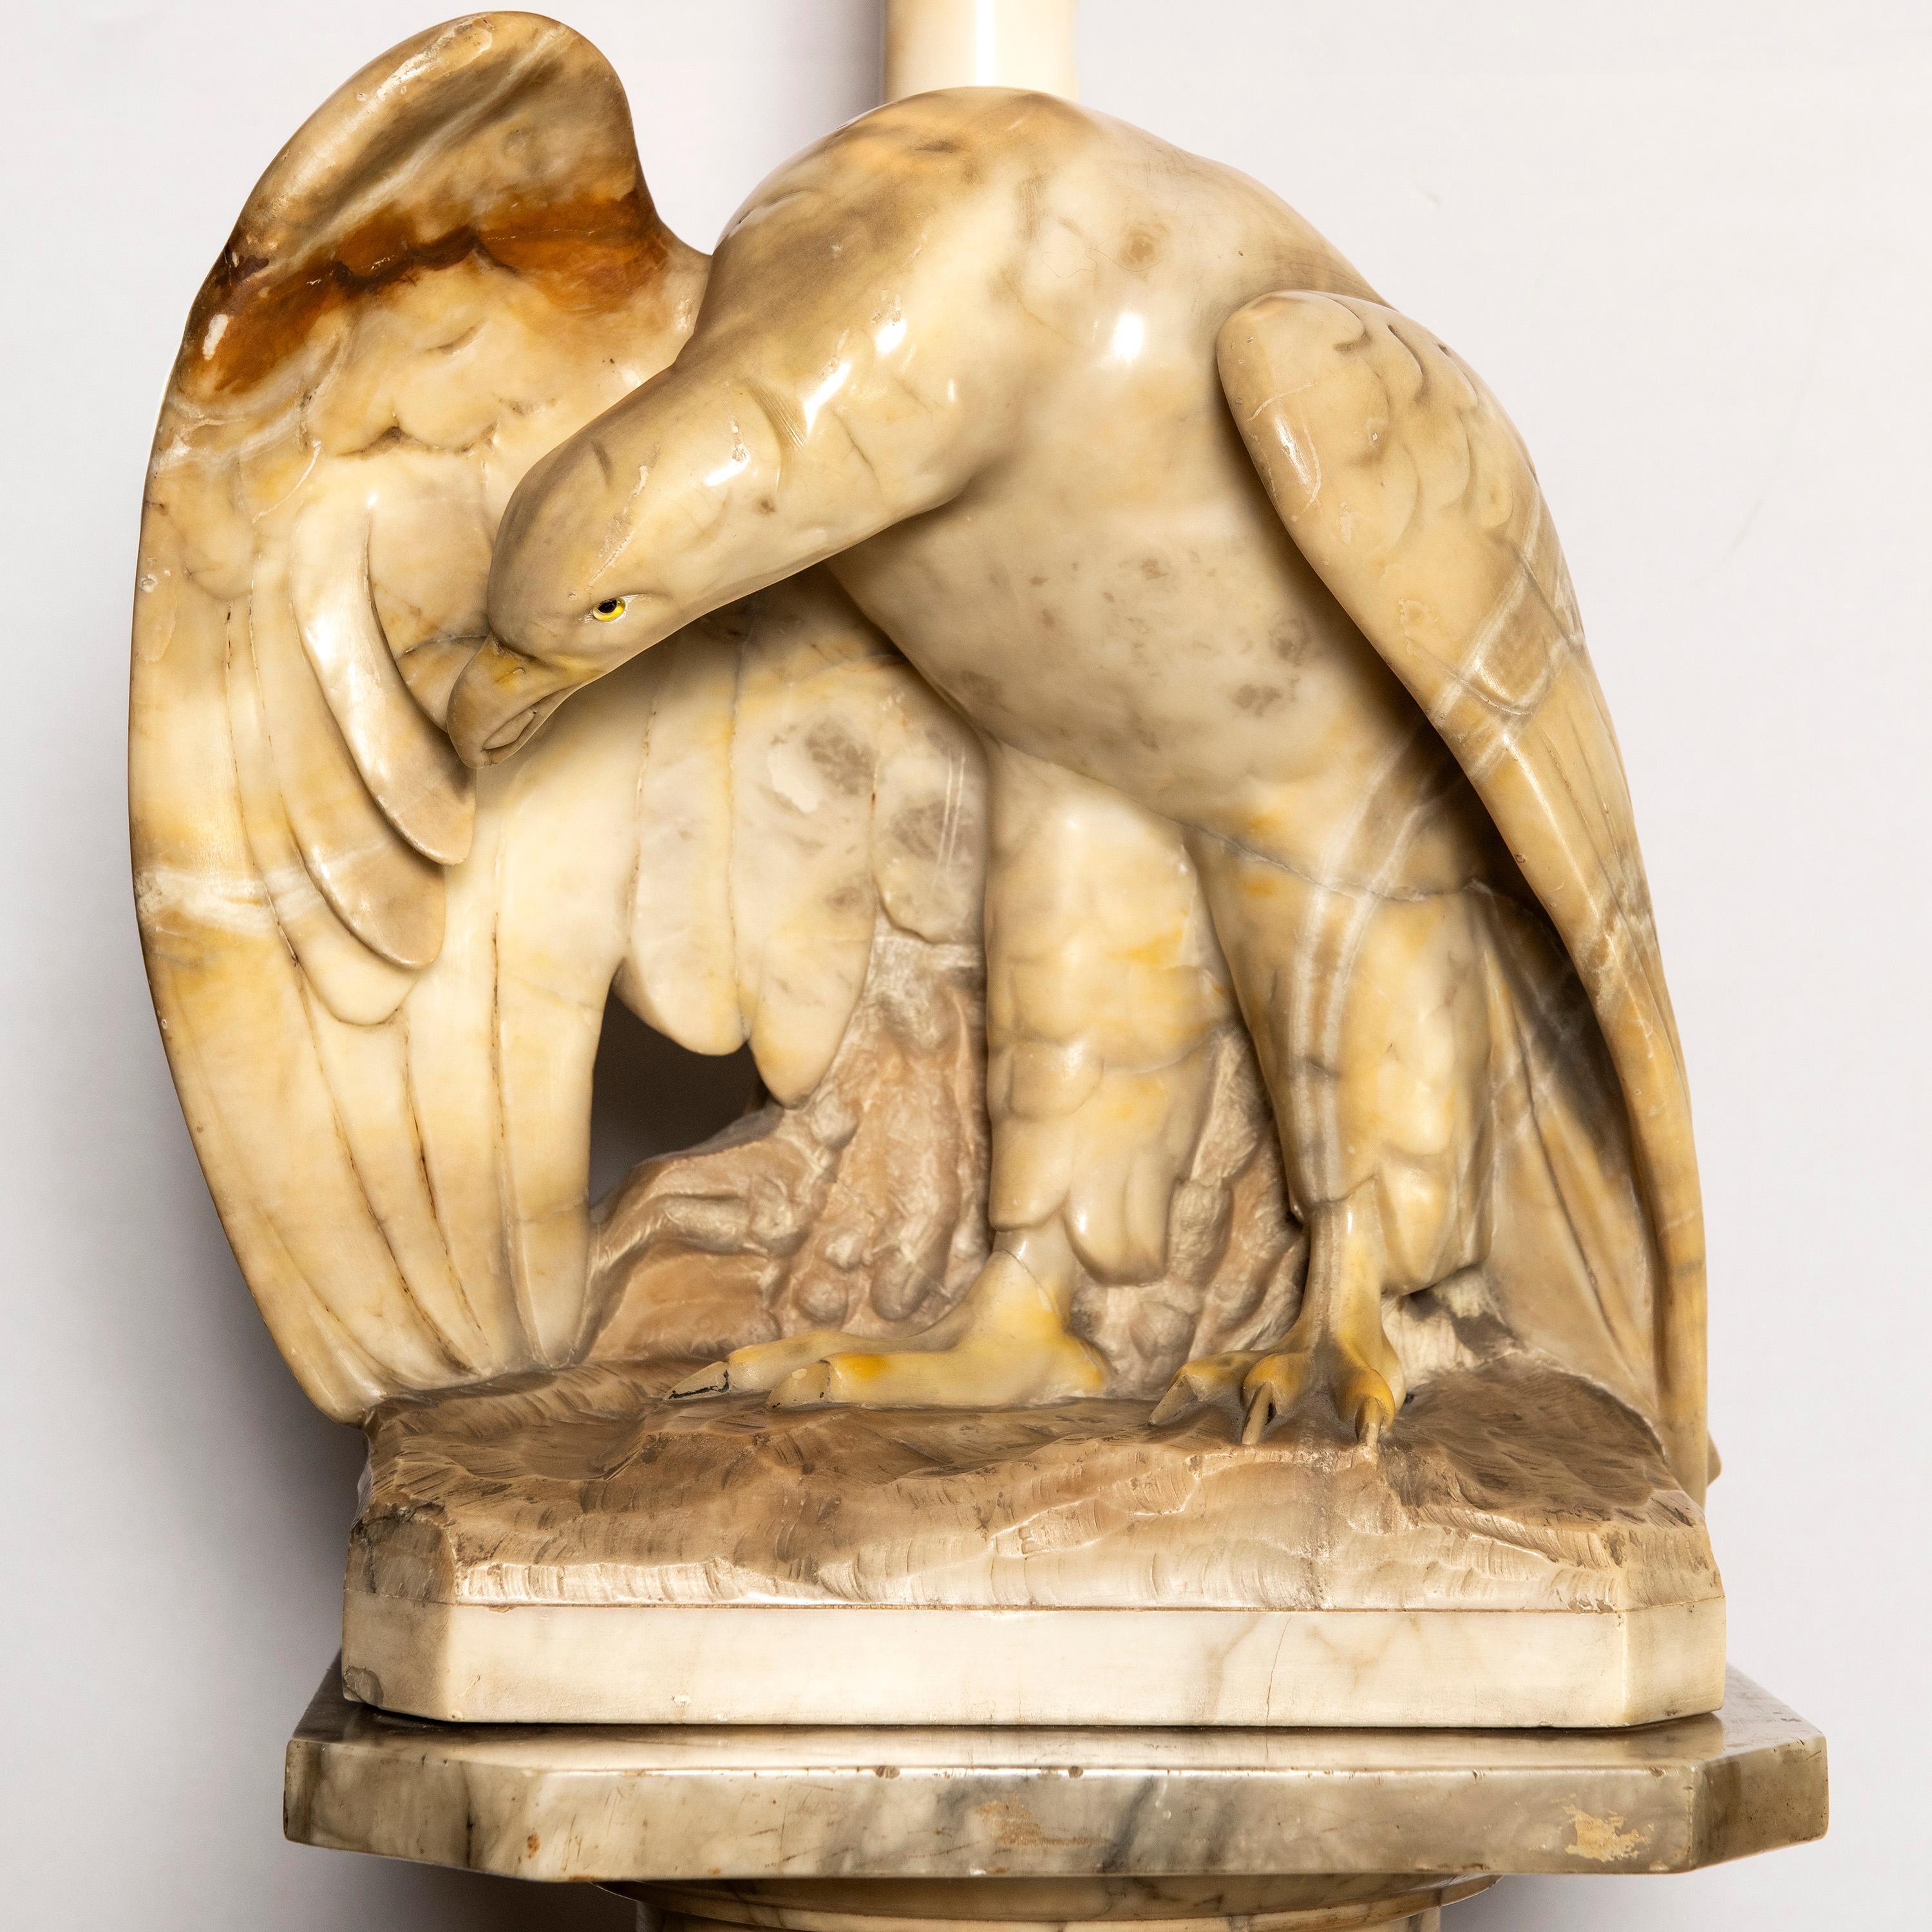 Italian Alabaster Lamp with Eagle and Base, Art Deco Period, Italy, Early 20th Century For Sale